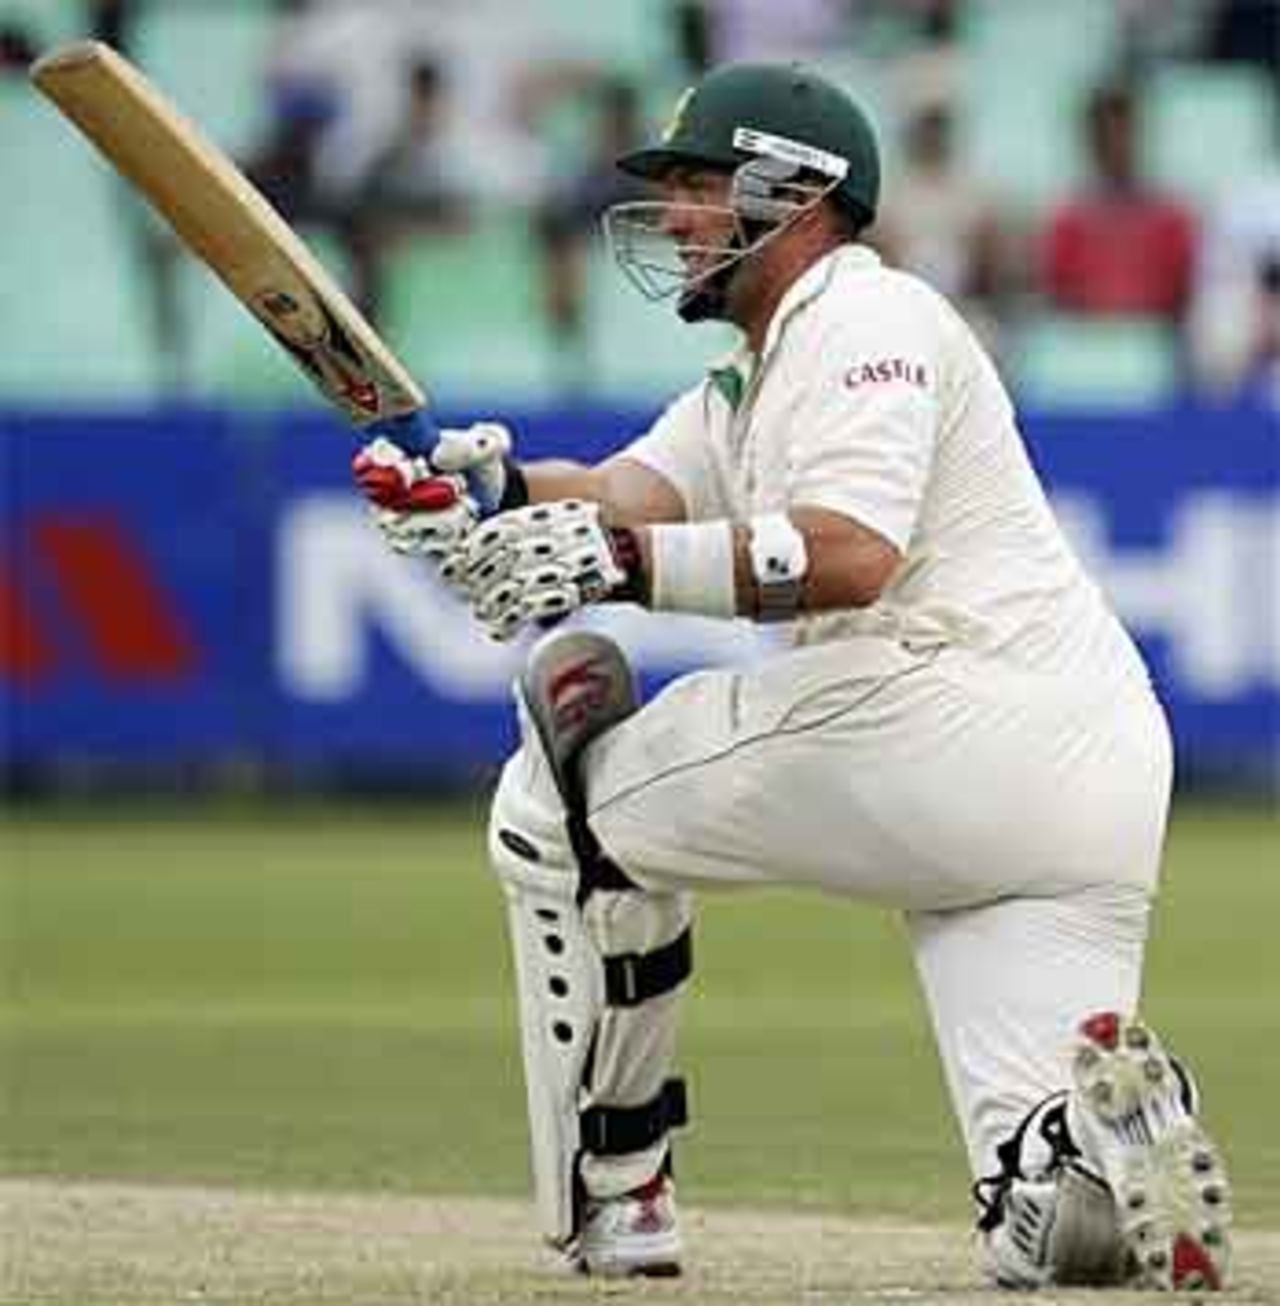 Jacques Kallis leads South Africa's fightback, South Africa v Australia, 2nd Test, Durban, March 25, 2006